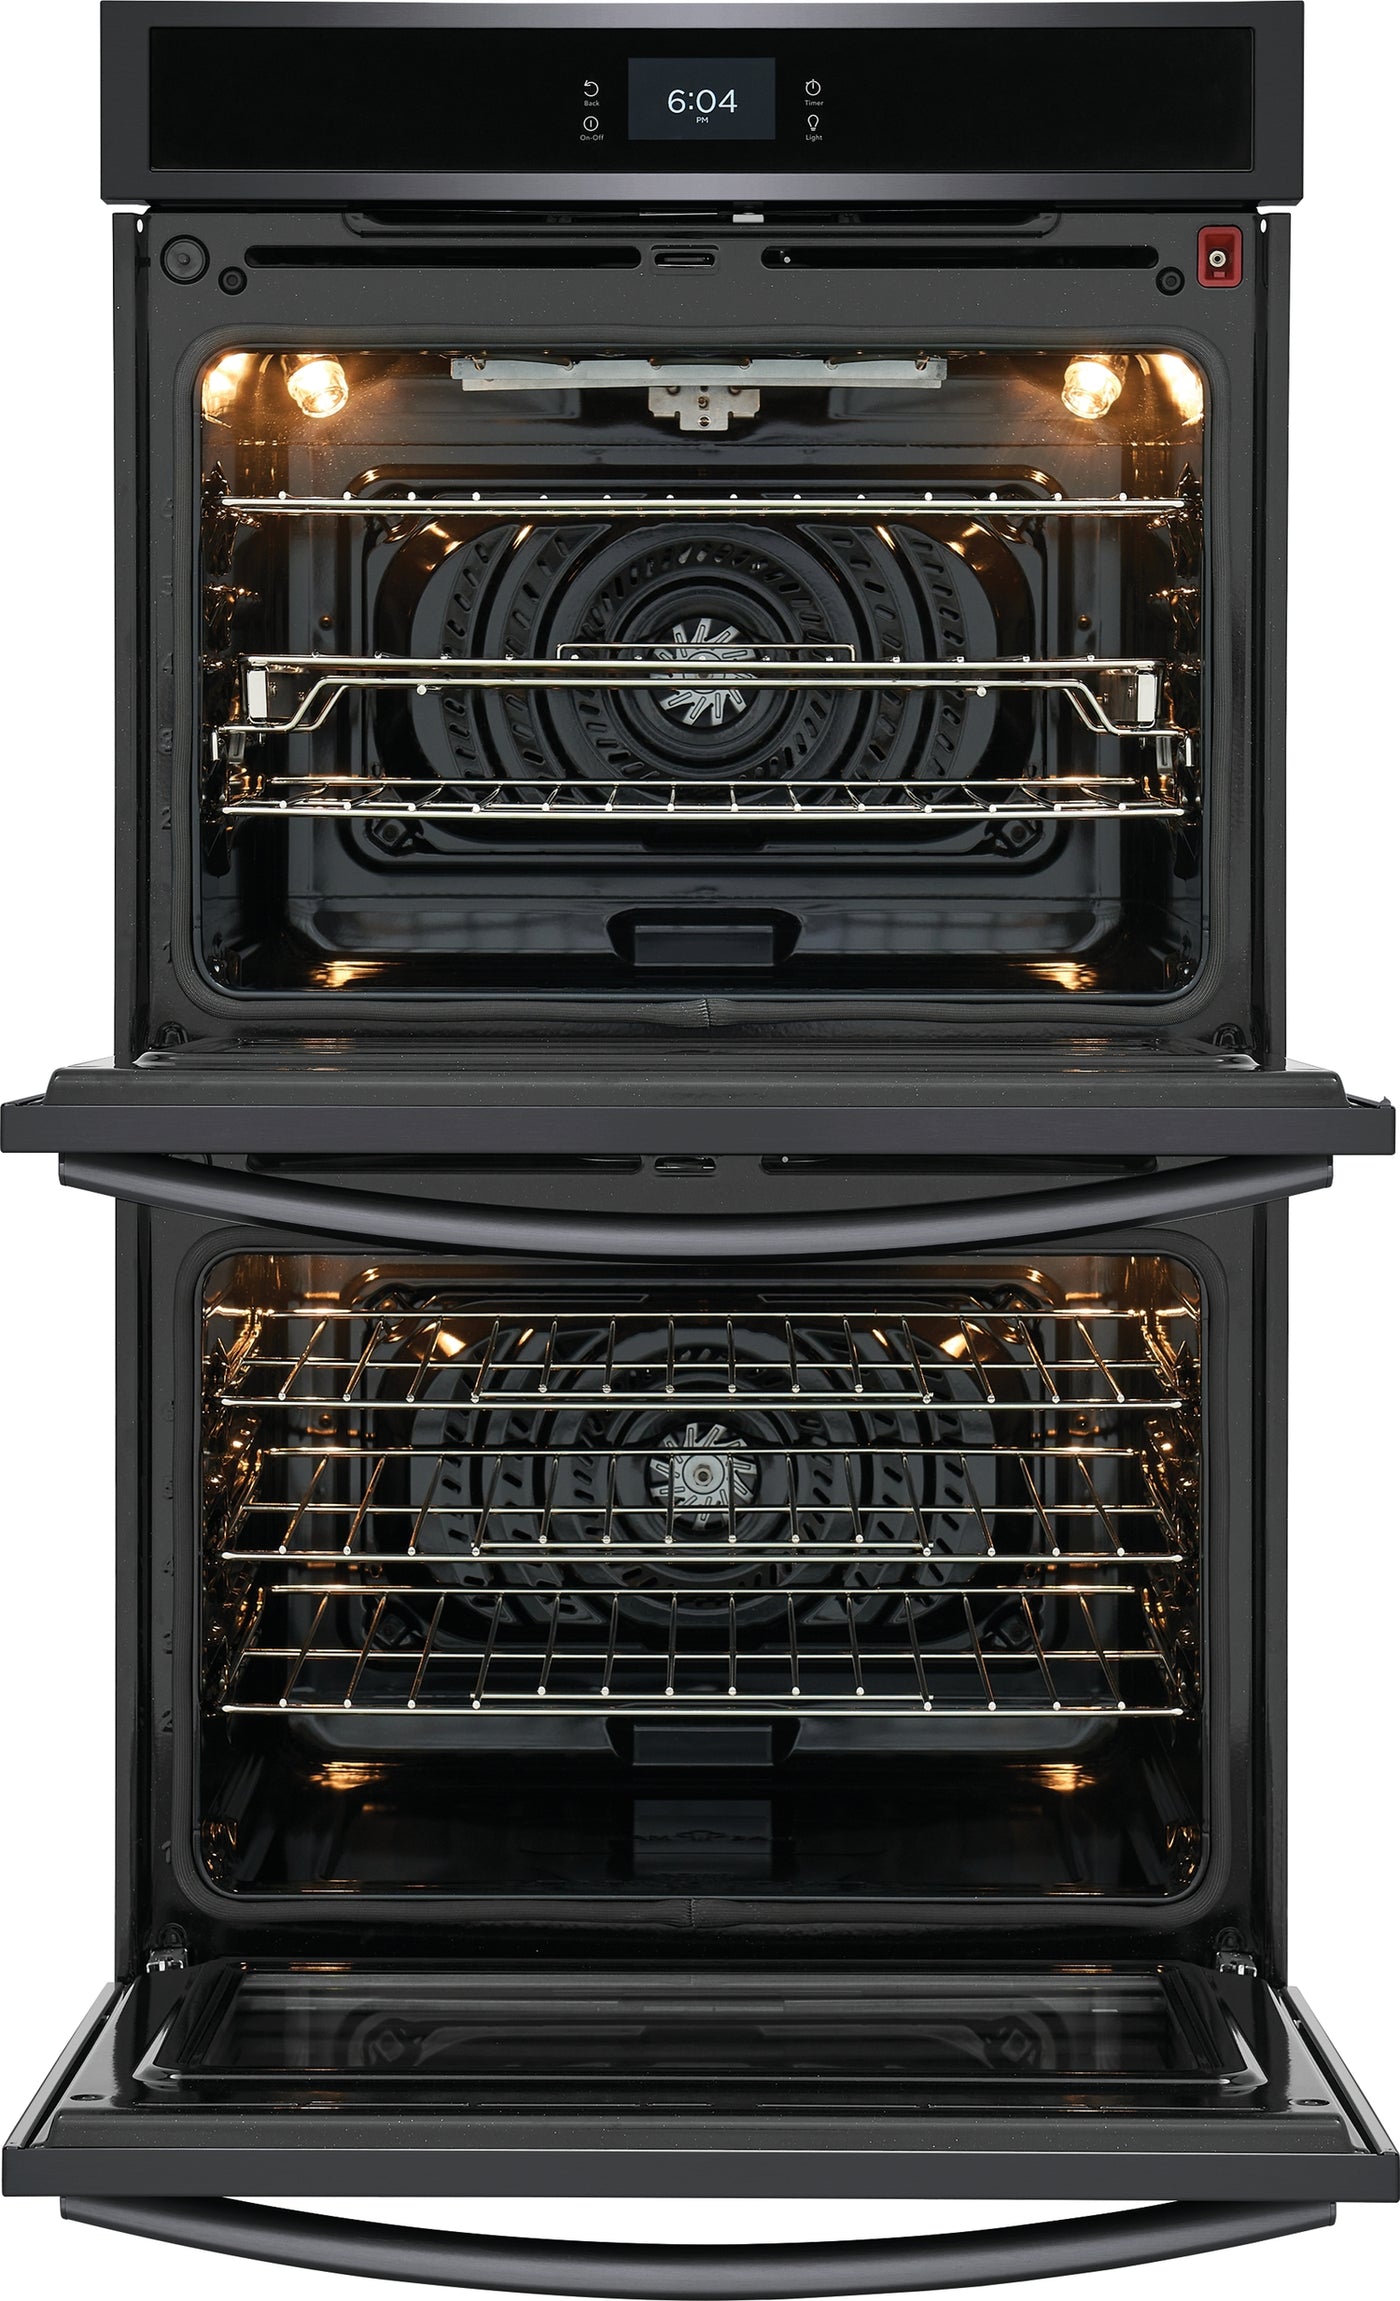 Frigidaire Gallery Smudge-Proof Black Stainless Steel 30" Double Wall Oven with Total Convection (10.6 Cu. Ft) - GCWD3067AD